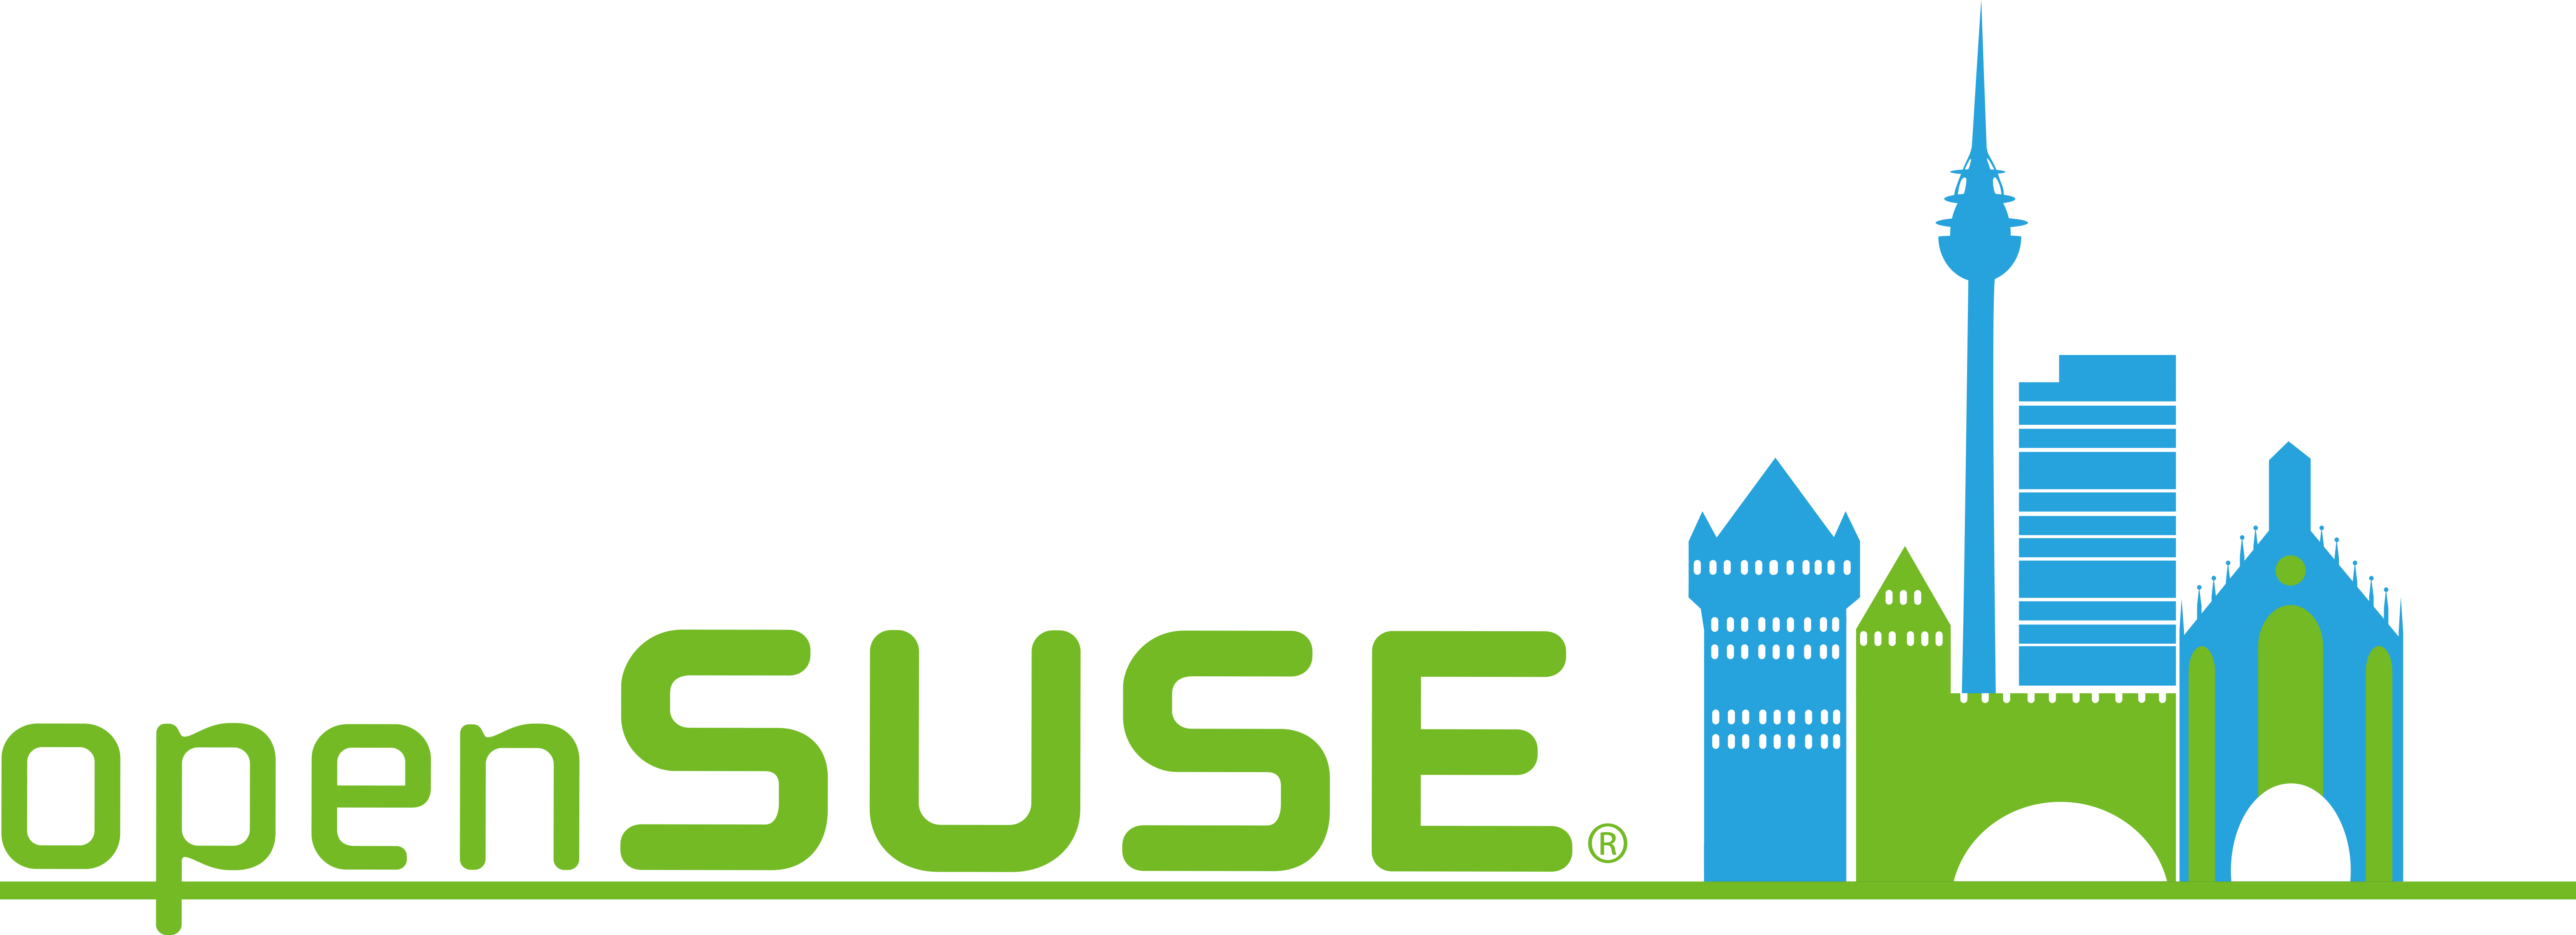 Submit a Presentation for the openSUSE Conference